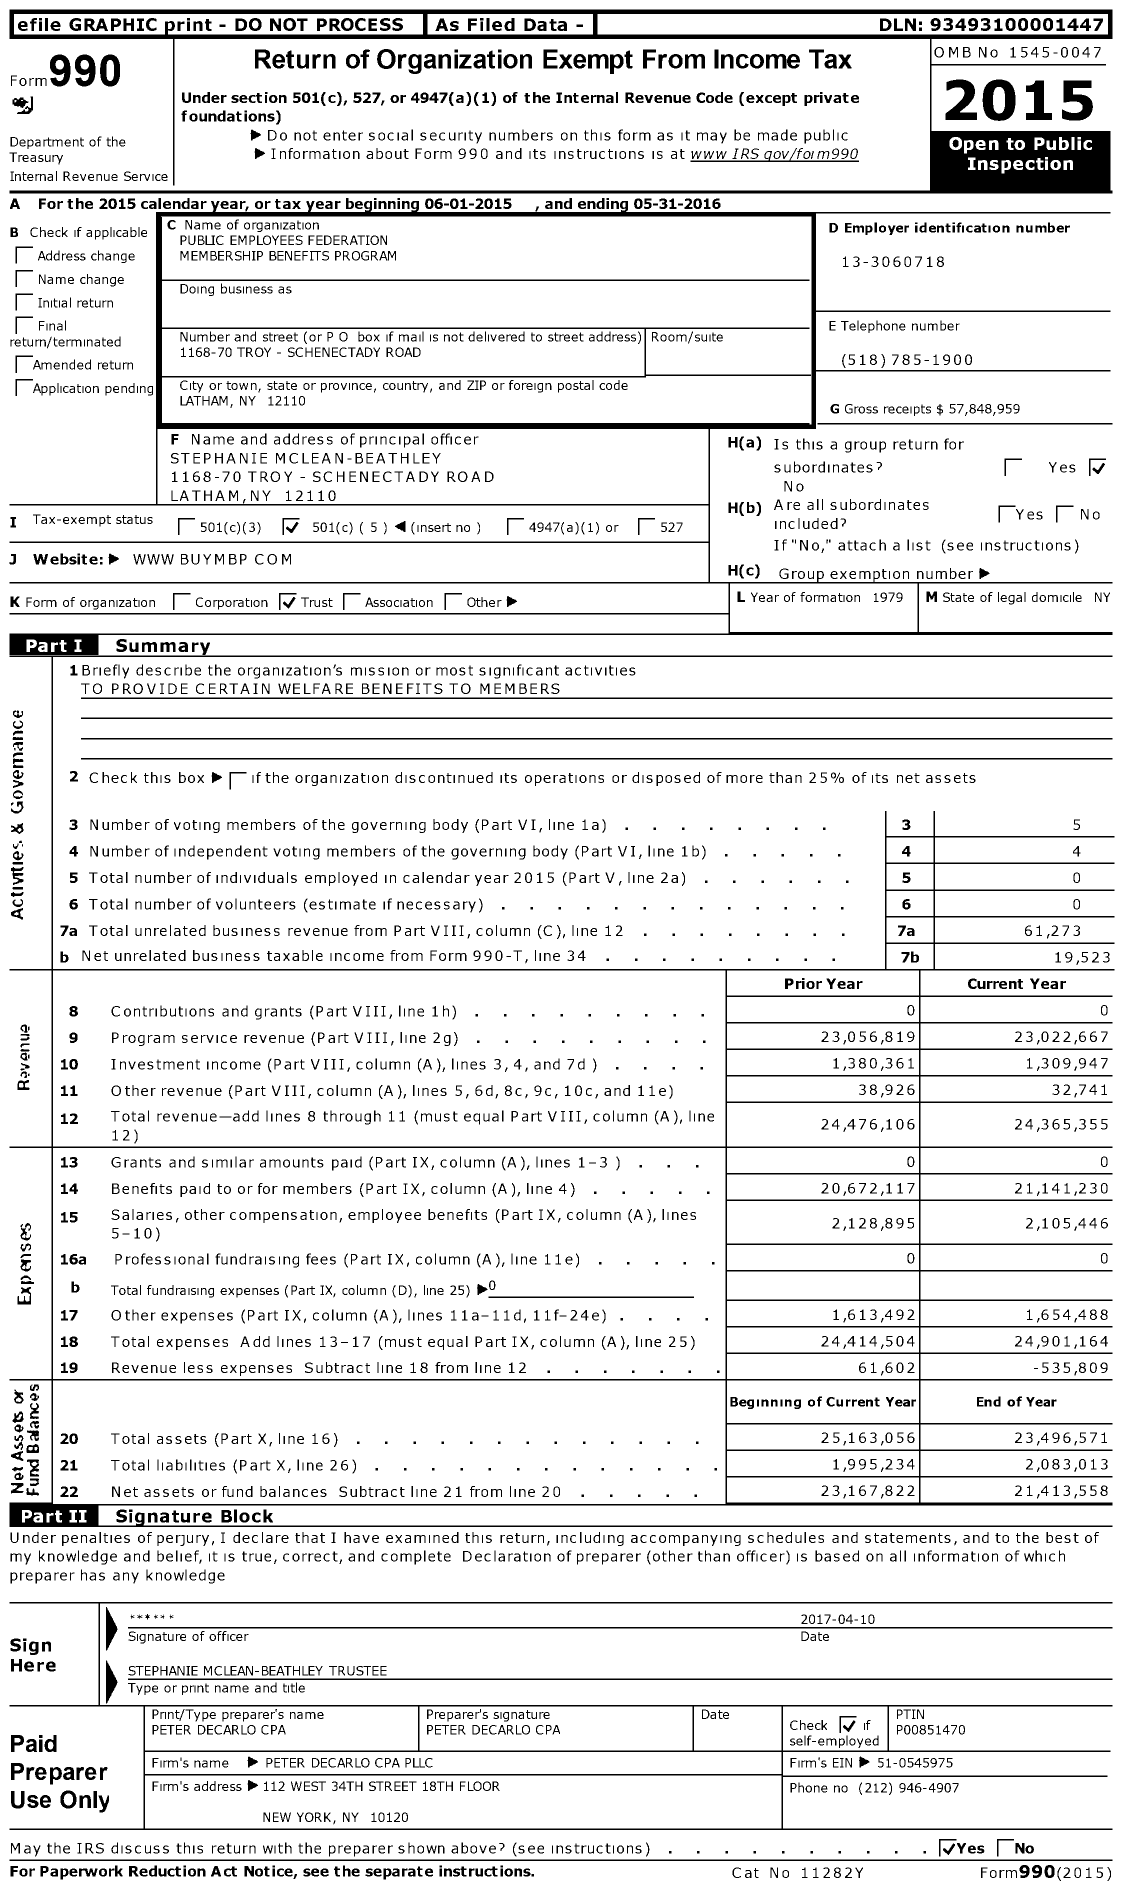 Image of first page of 2015 Form 990O for Public Employees Federation Membership Benefits Program